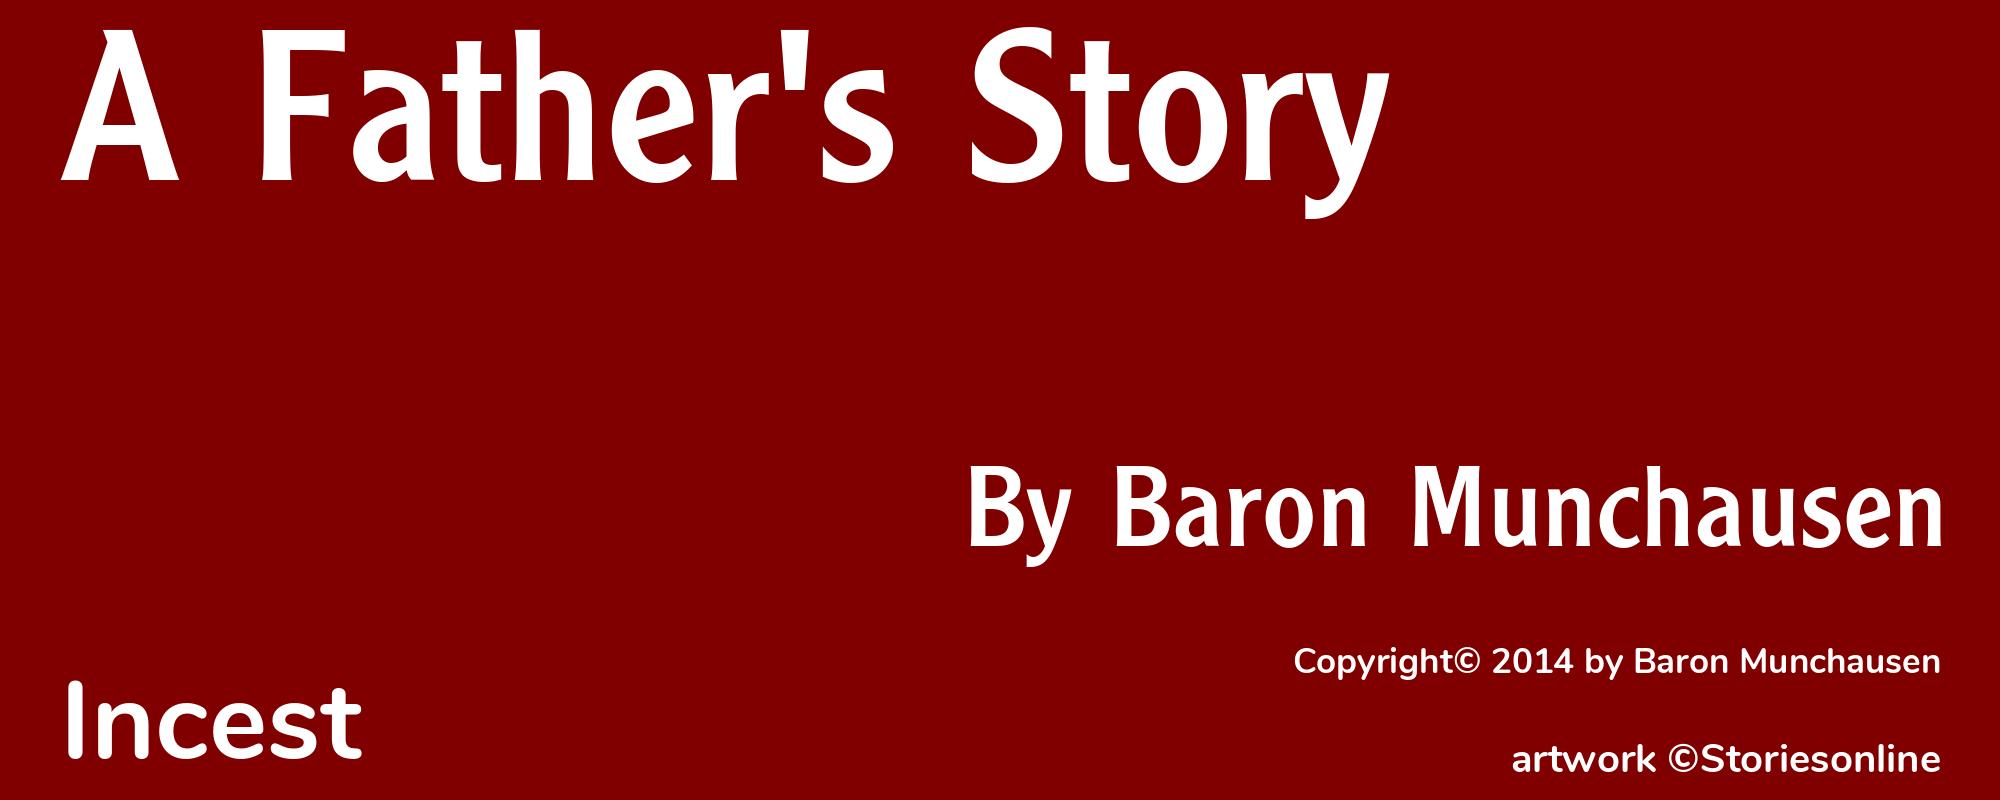 A Father's Story - Cover